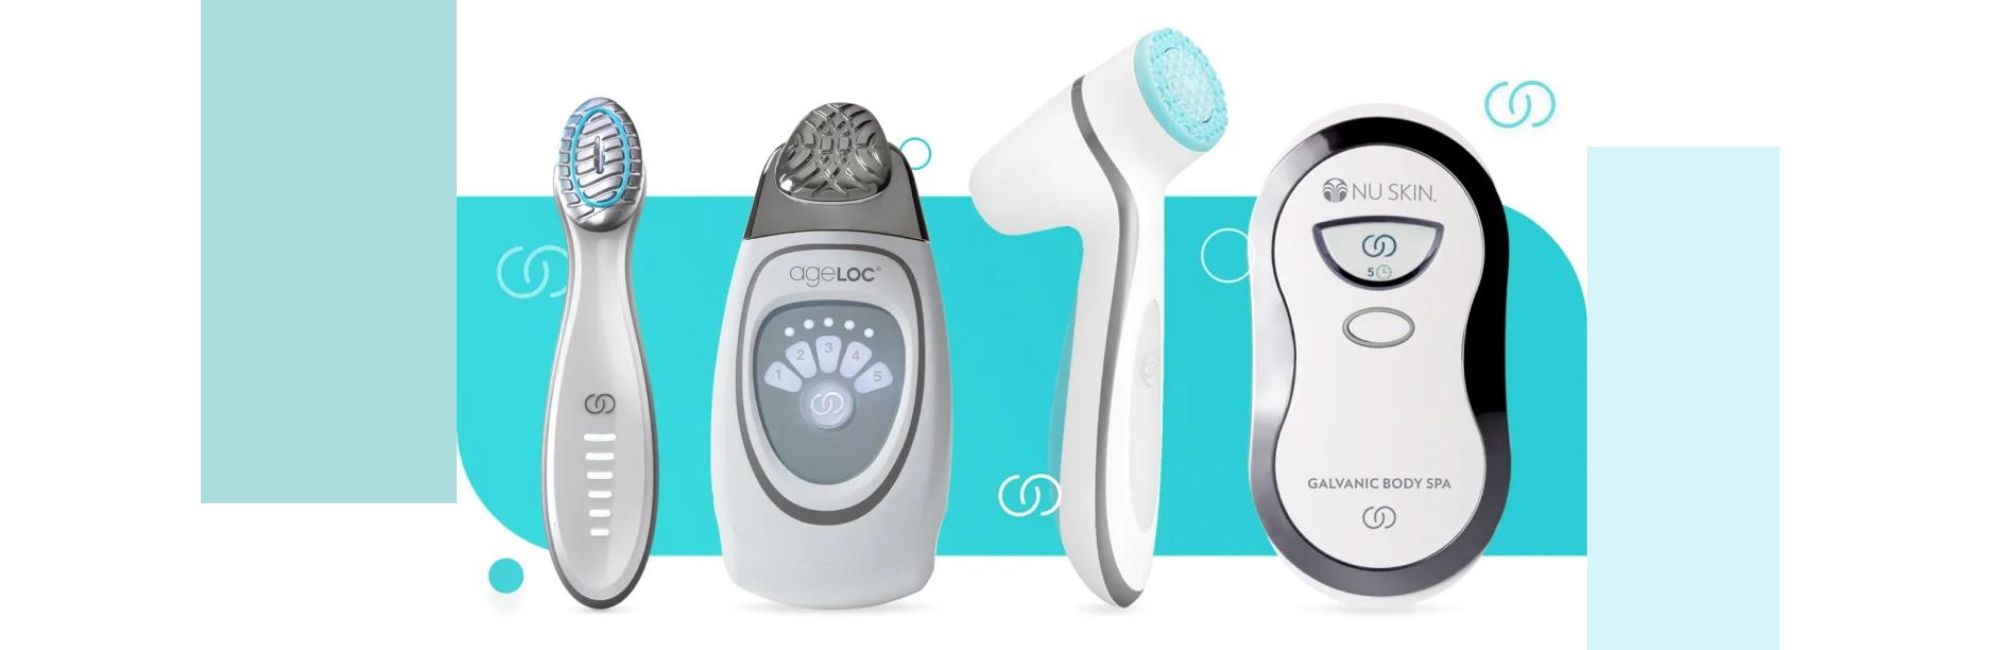 Having your own beauty devices at home gives you the flexibility to enjoy some pampering and tender loving care whenever you need, at your own convenience and in the comforts of your own home.